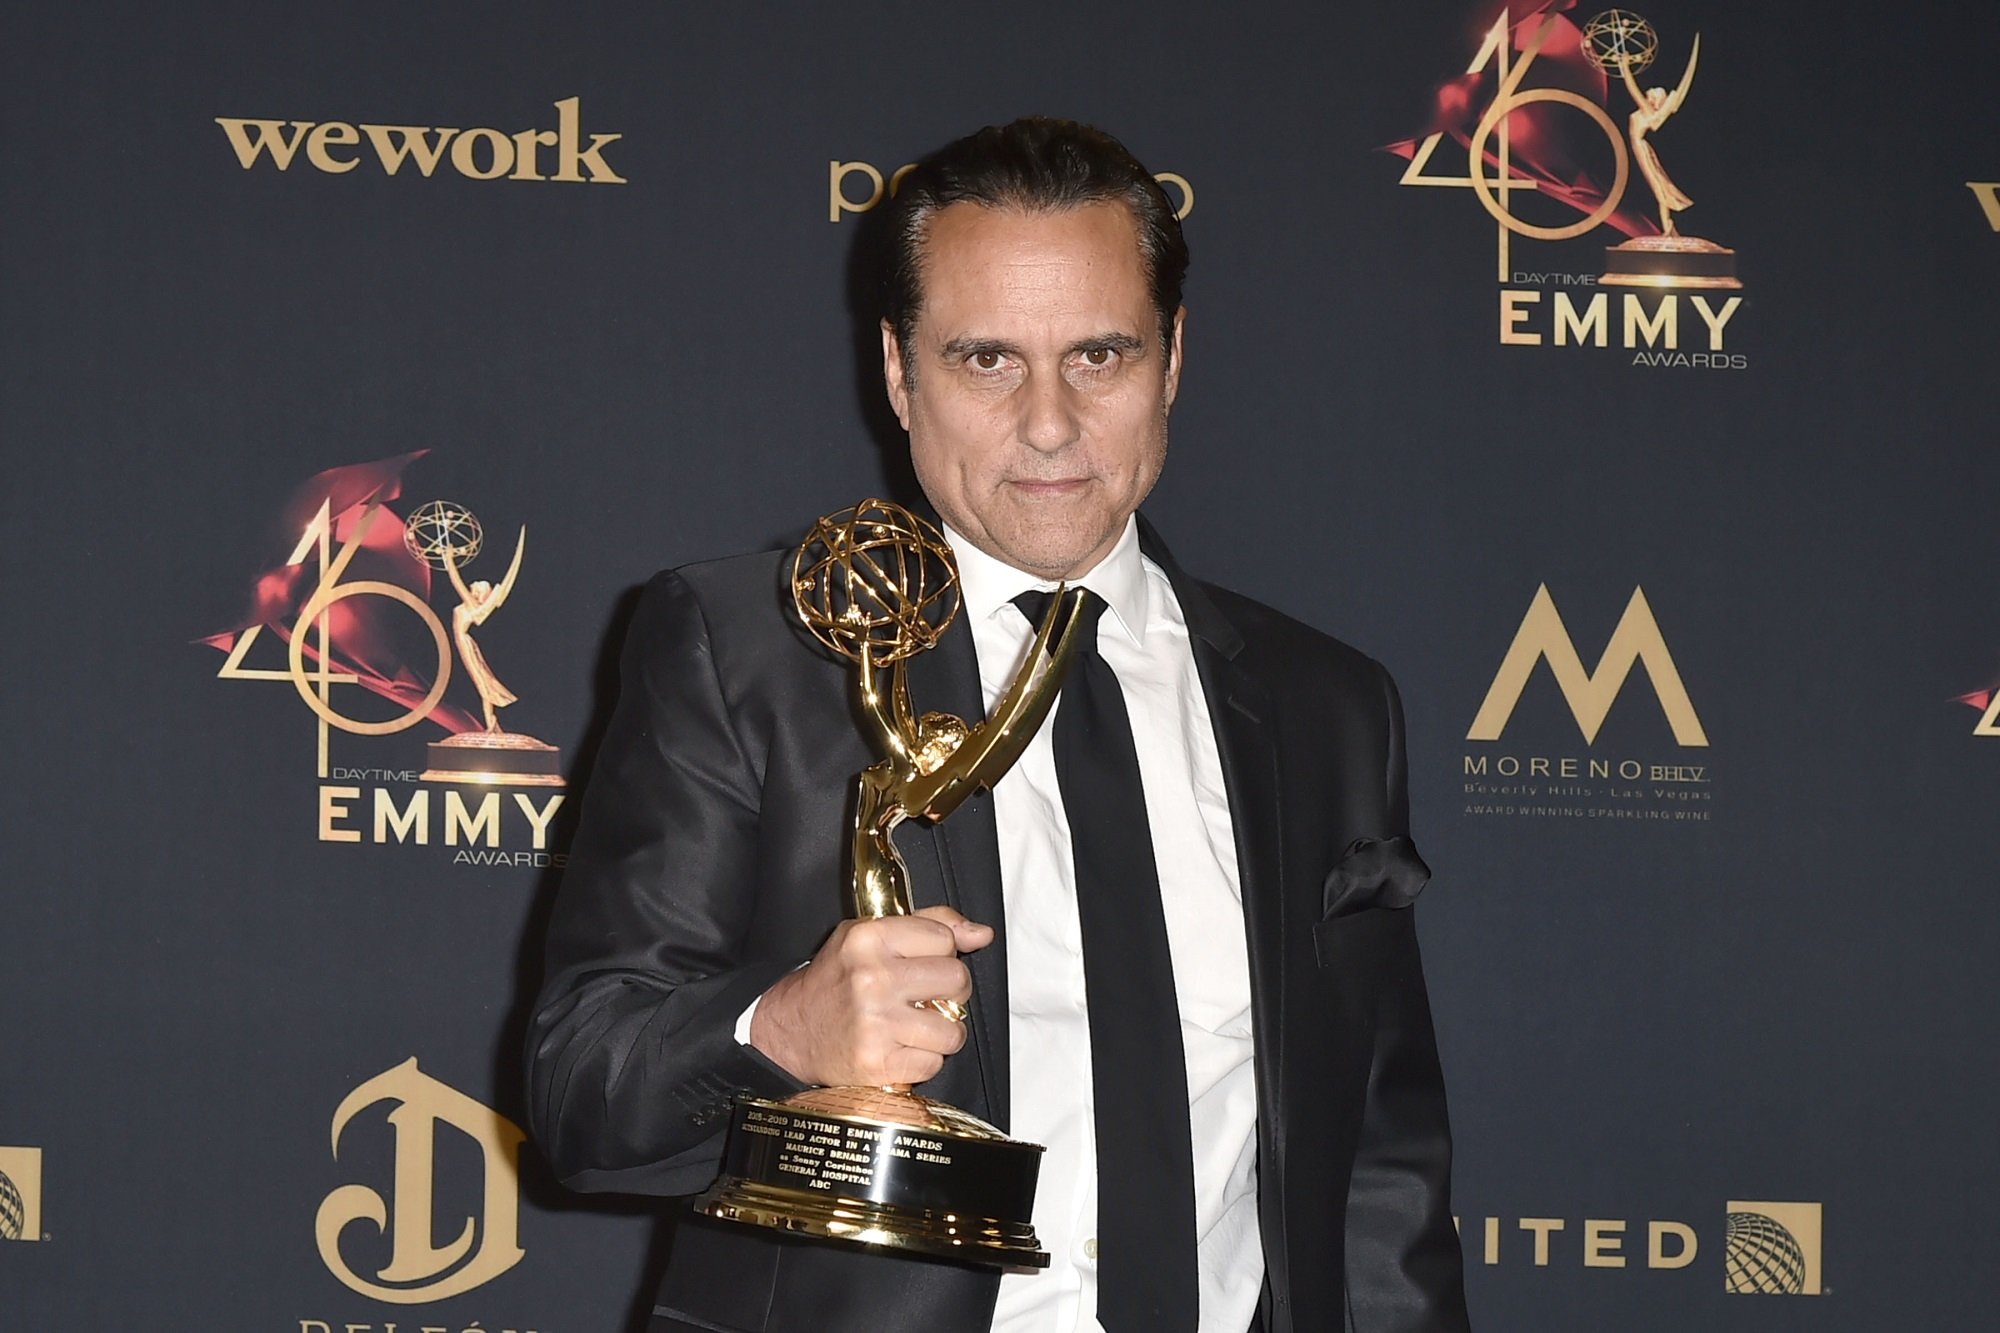 General Hospital star Maurice Benard is pictured here holding a Daytime Emmy while wearing a black suit and a purple collared shirt